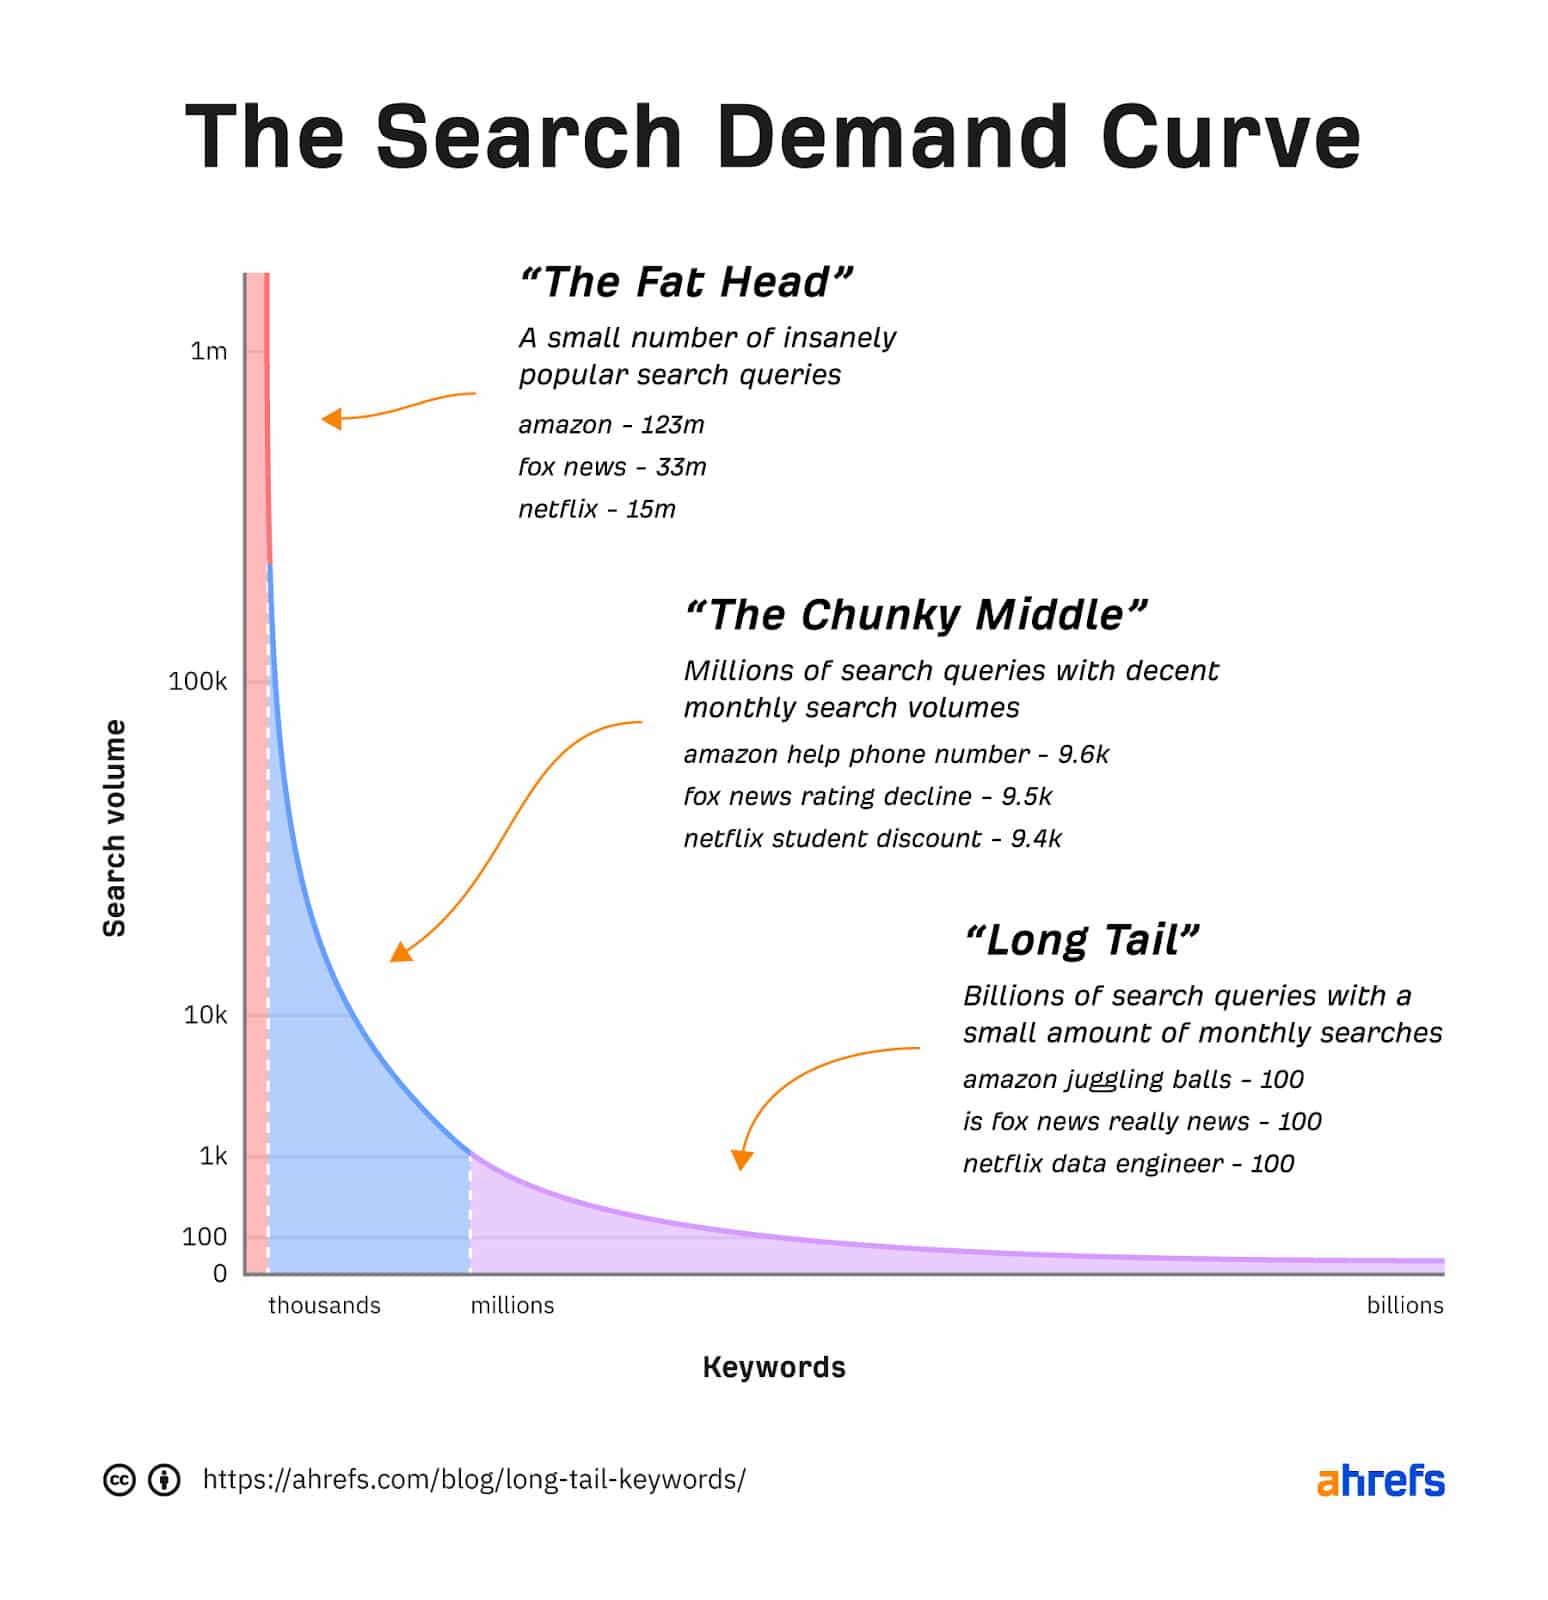 How to do keyword research for SEO - Long-Tail Keywords